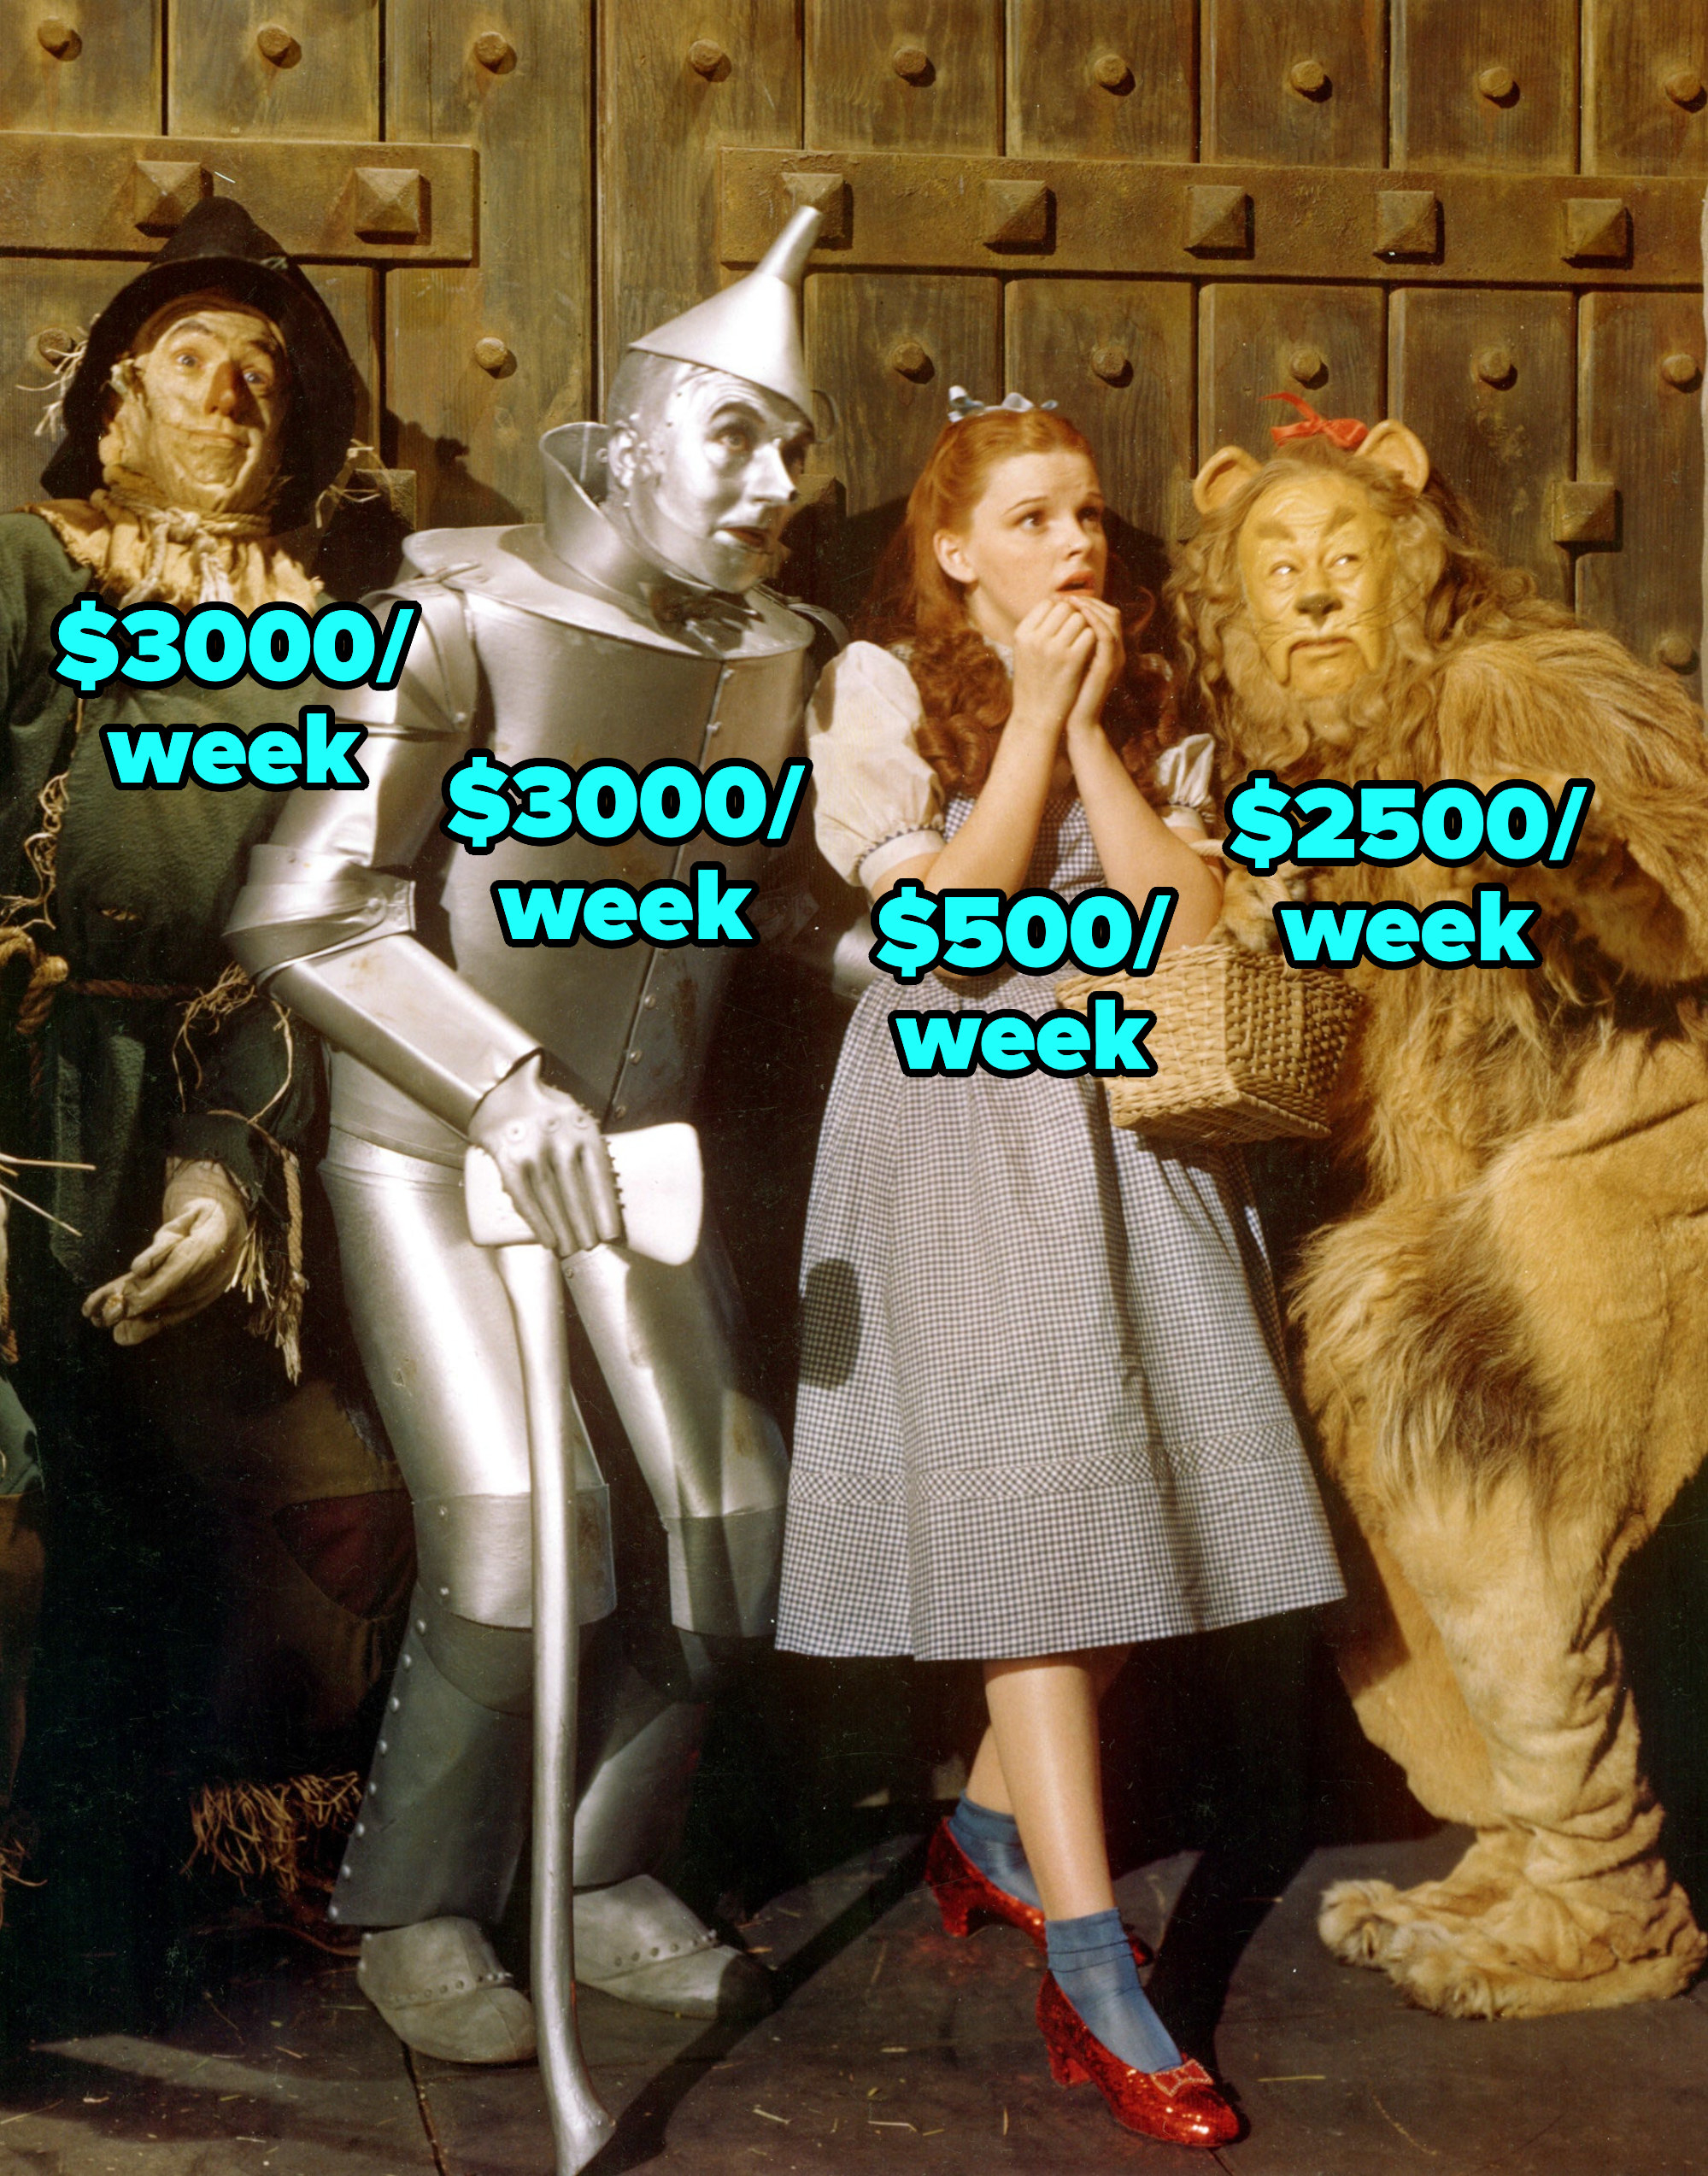 Dorothy labeled &quot;500/week,&quot; the scarecrow labeled &quot;3000/week,&quot; and the tin man and the lion labeled &quot;3000/week&quot; and &quot;2500 a week&quot; respectively